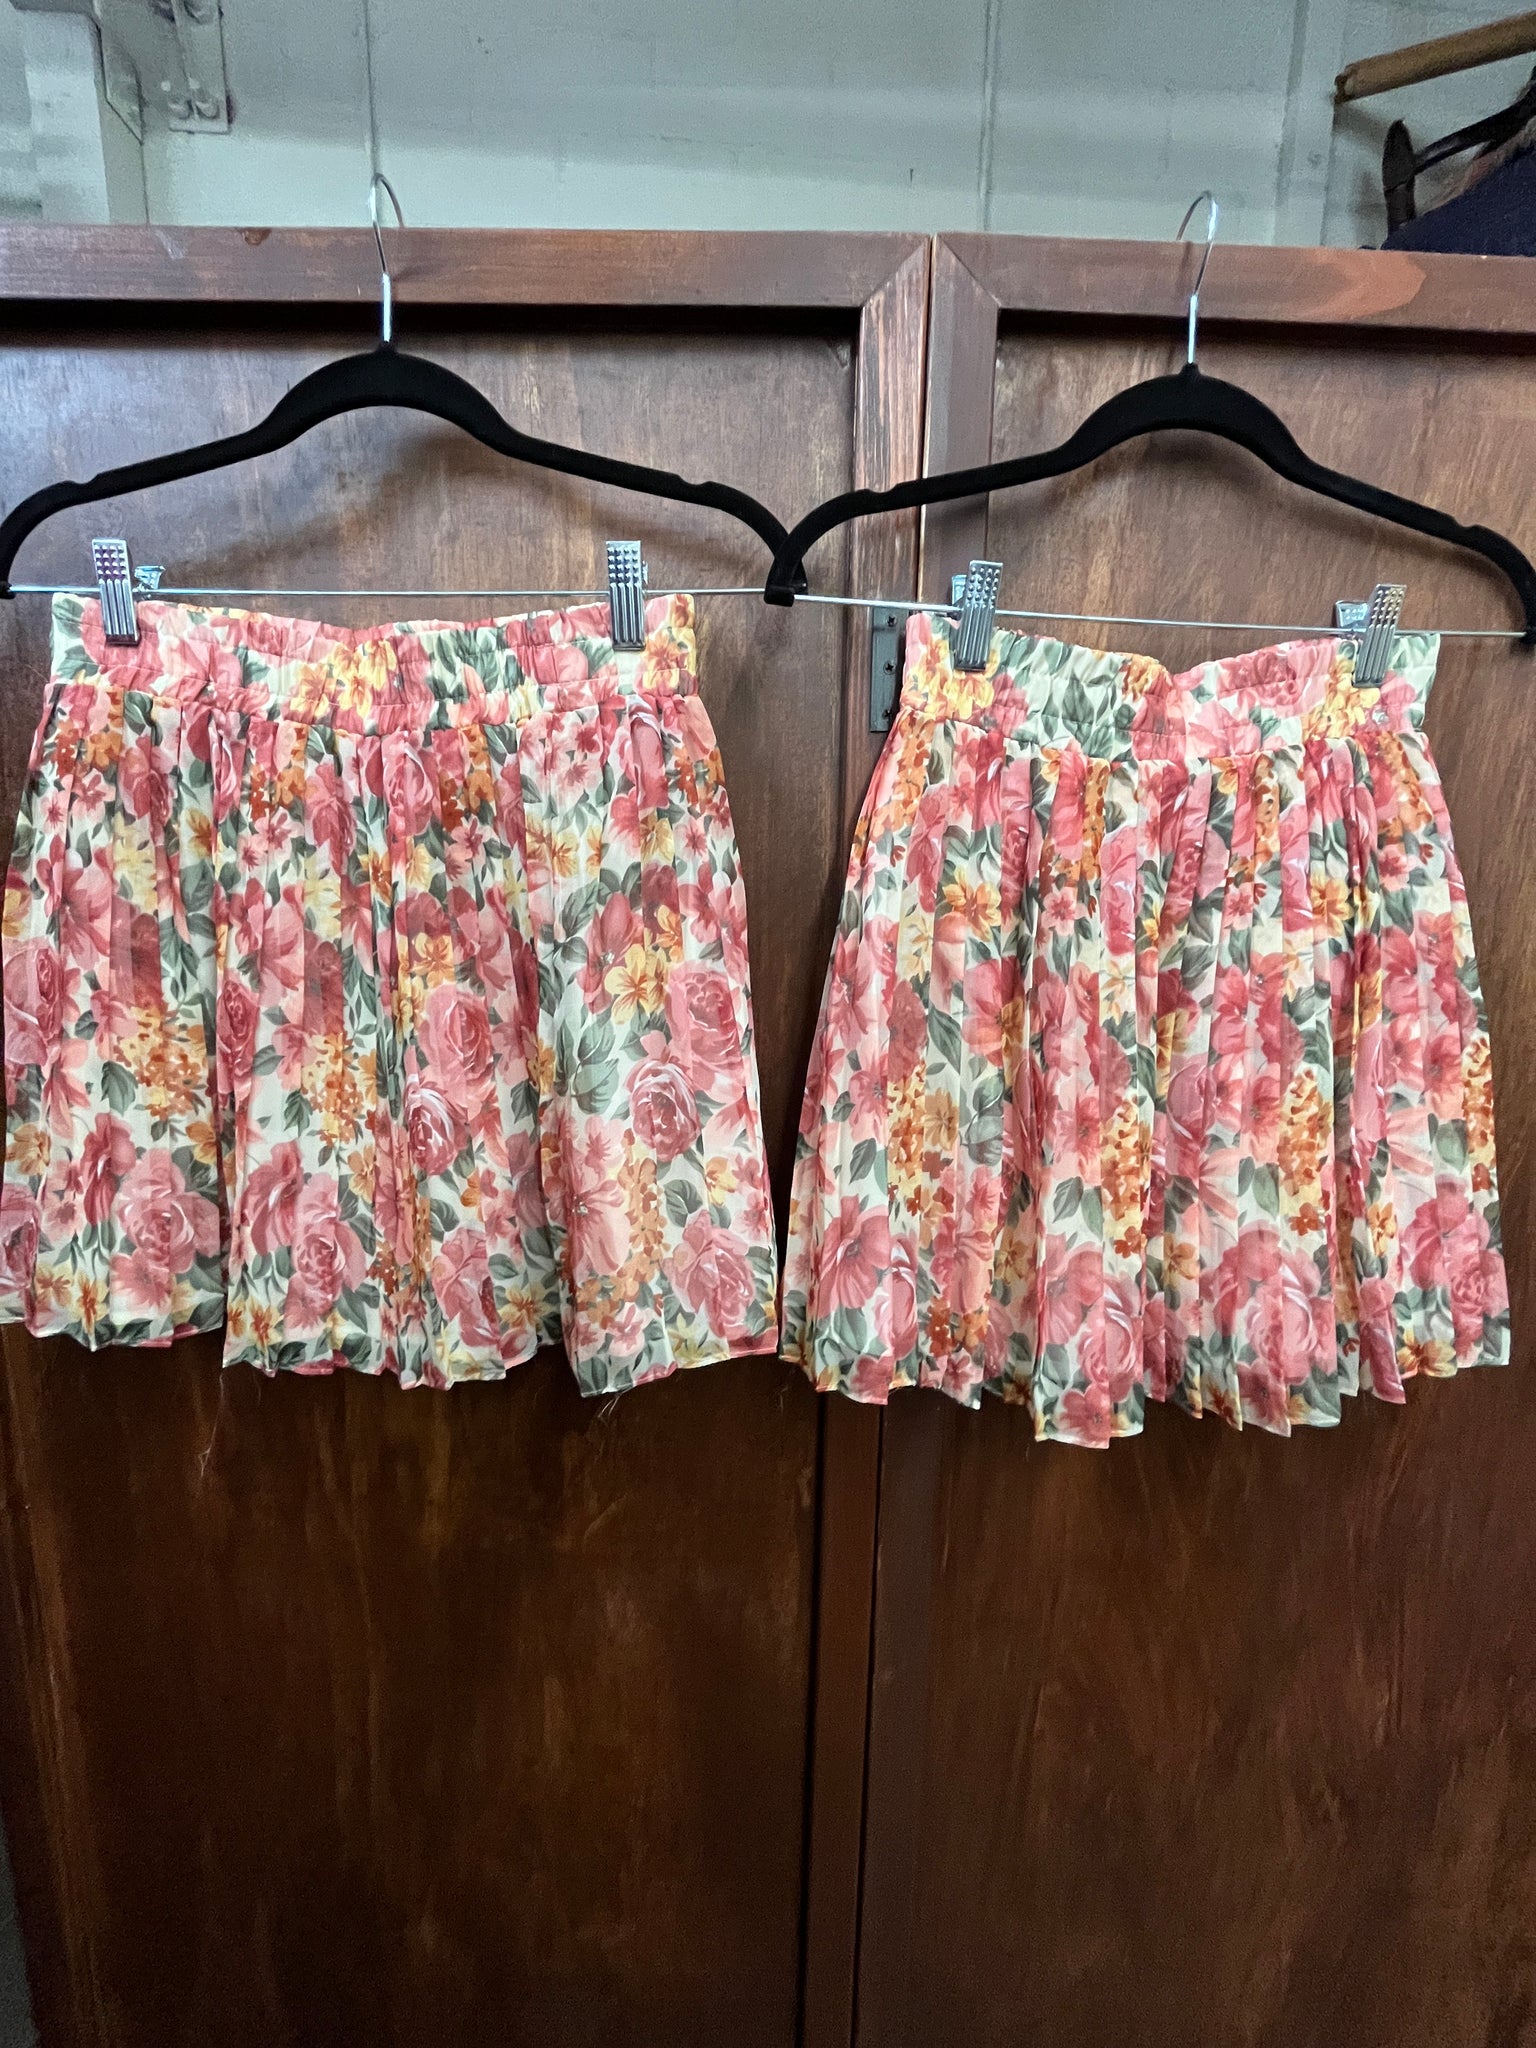 1990s MULTIPLES- SKIRTS- floral print sheer pleated